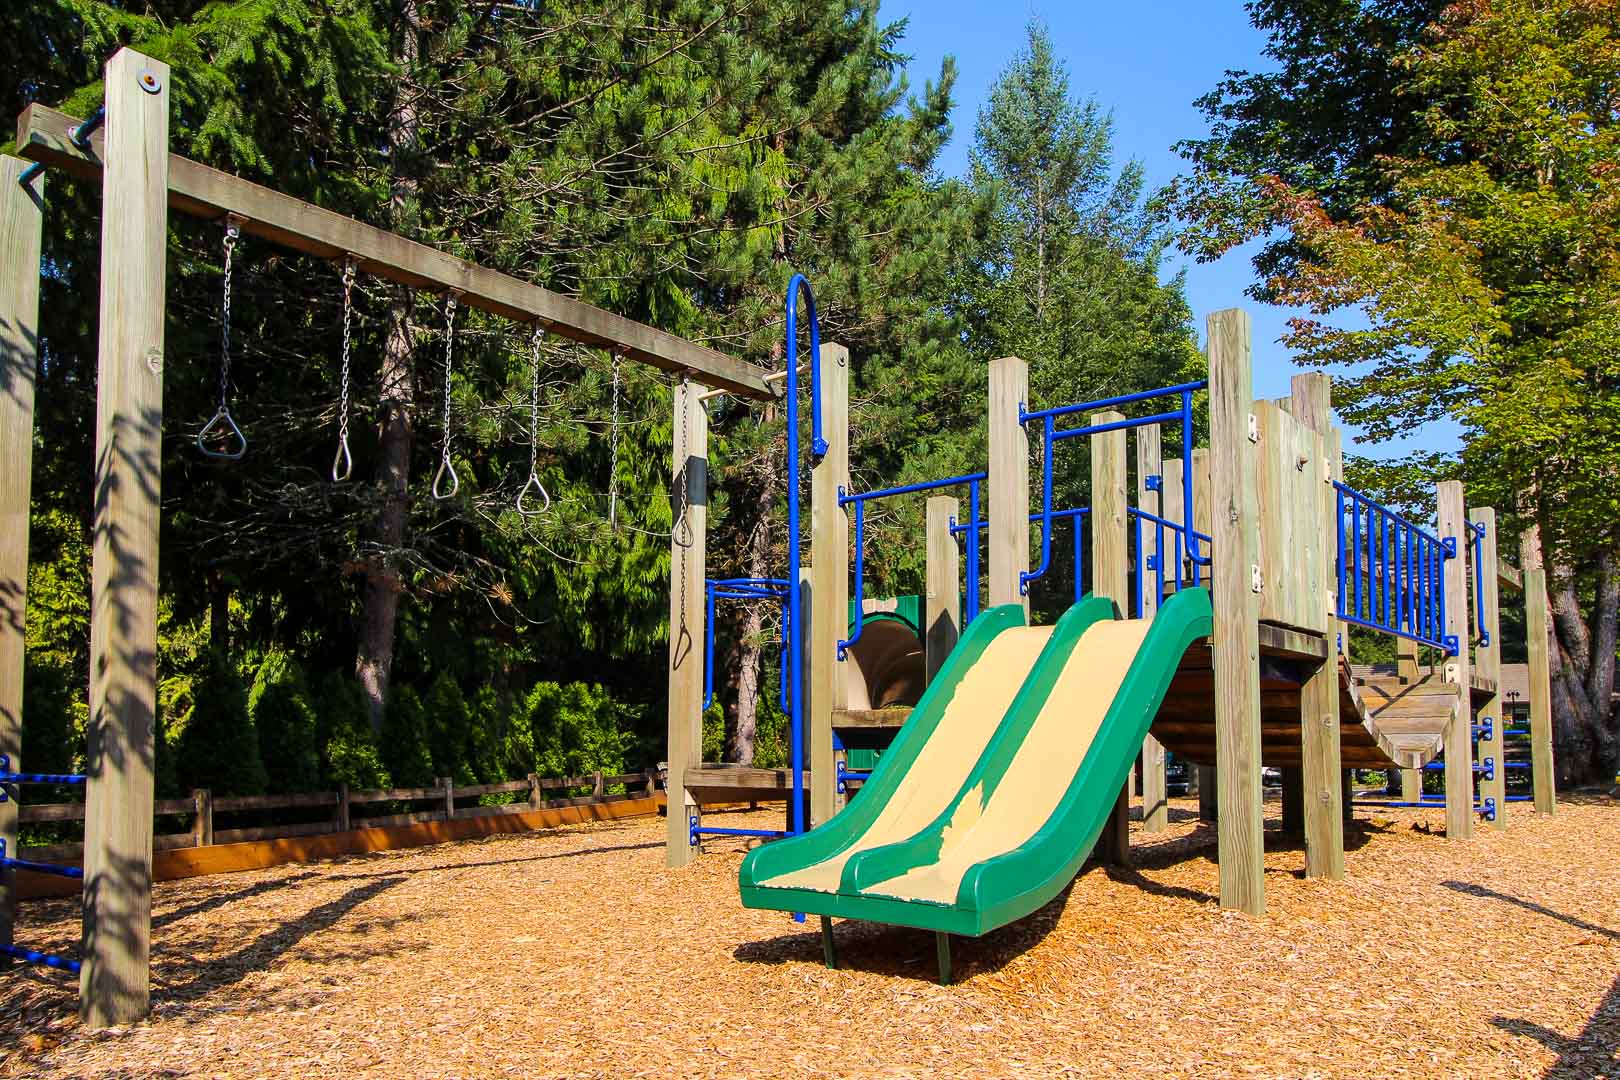 A spacious outdoor playground at VRI's Whispering Woods Resort in Oregon.